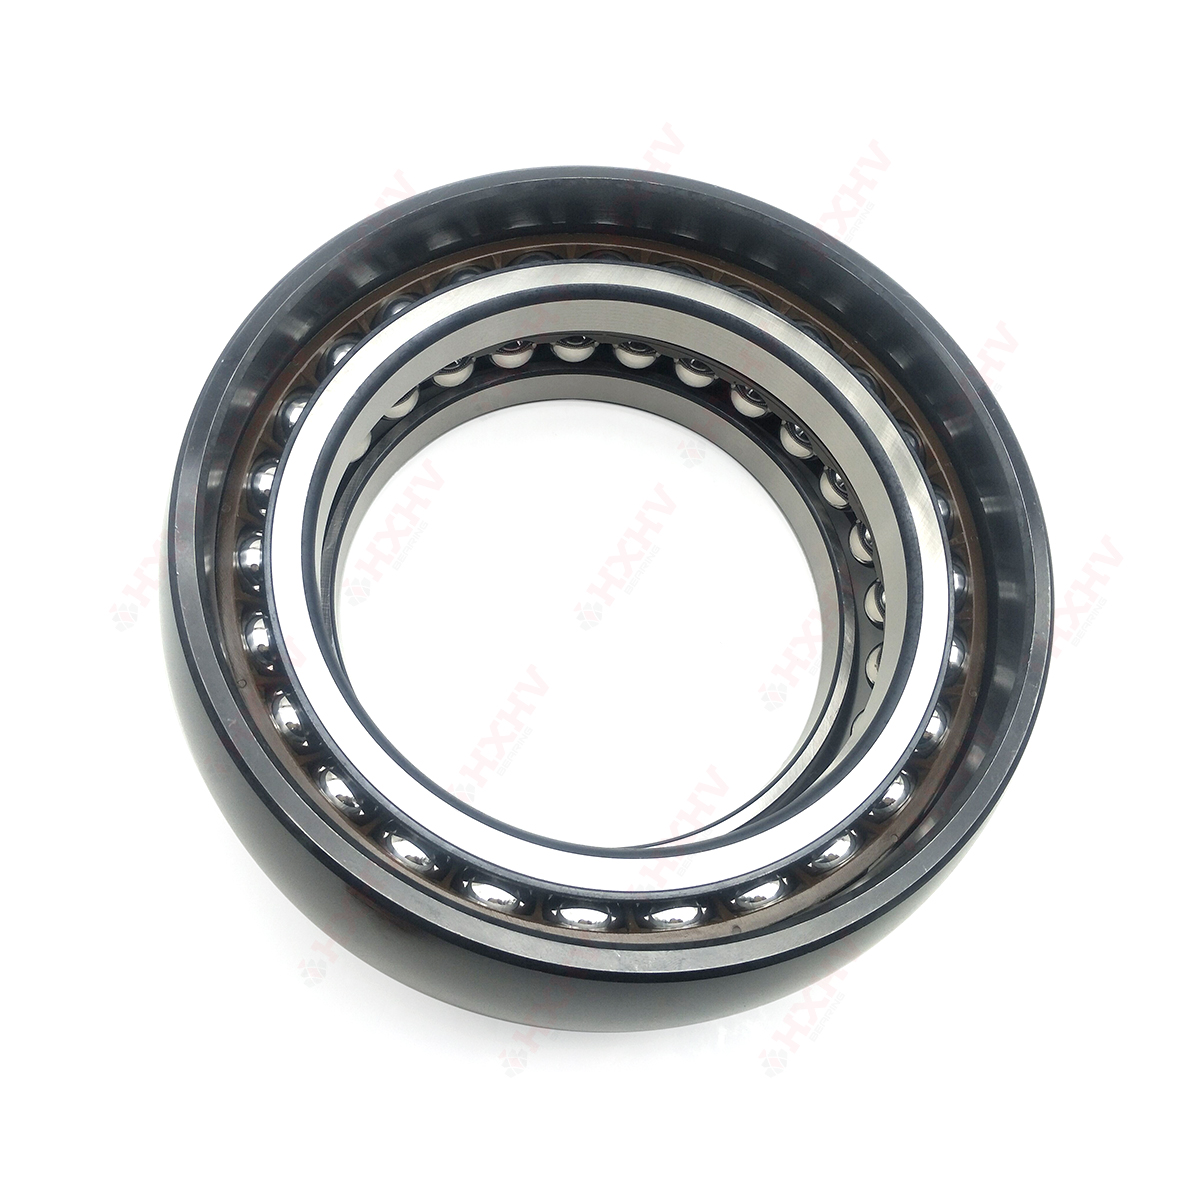 CPM 2513 hxhv double row truck ball bearing for concrete mixer with size 200x300x118mm Featured Image